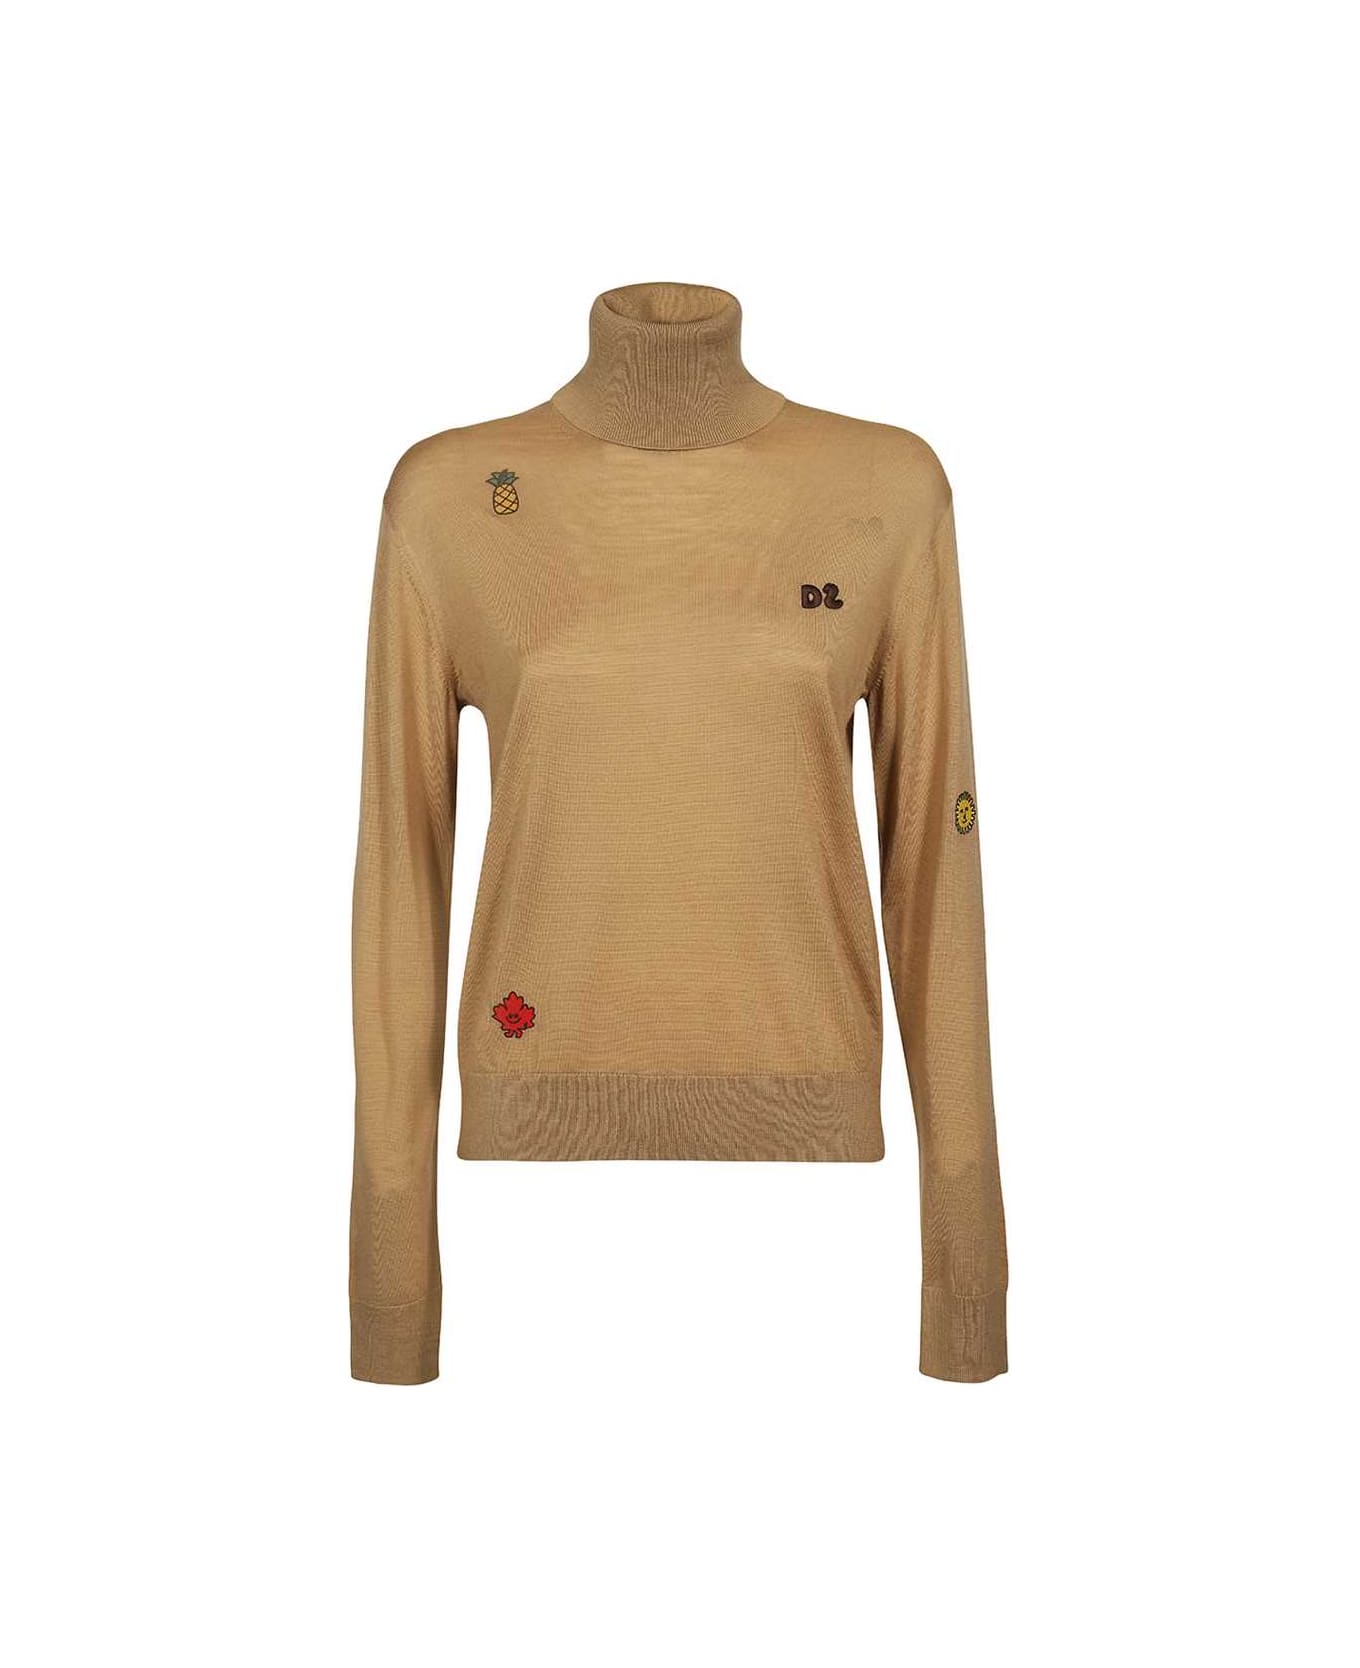 Dsquared2 Wool Sweater - Camel